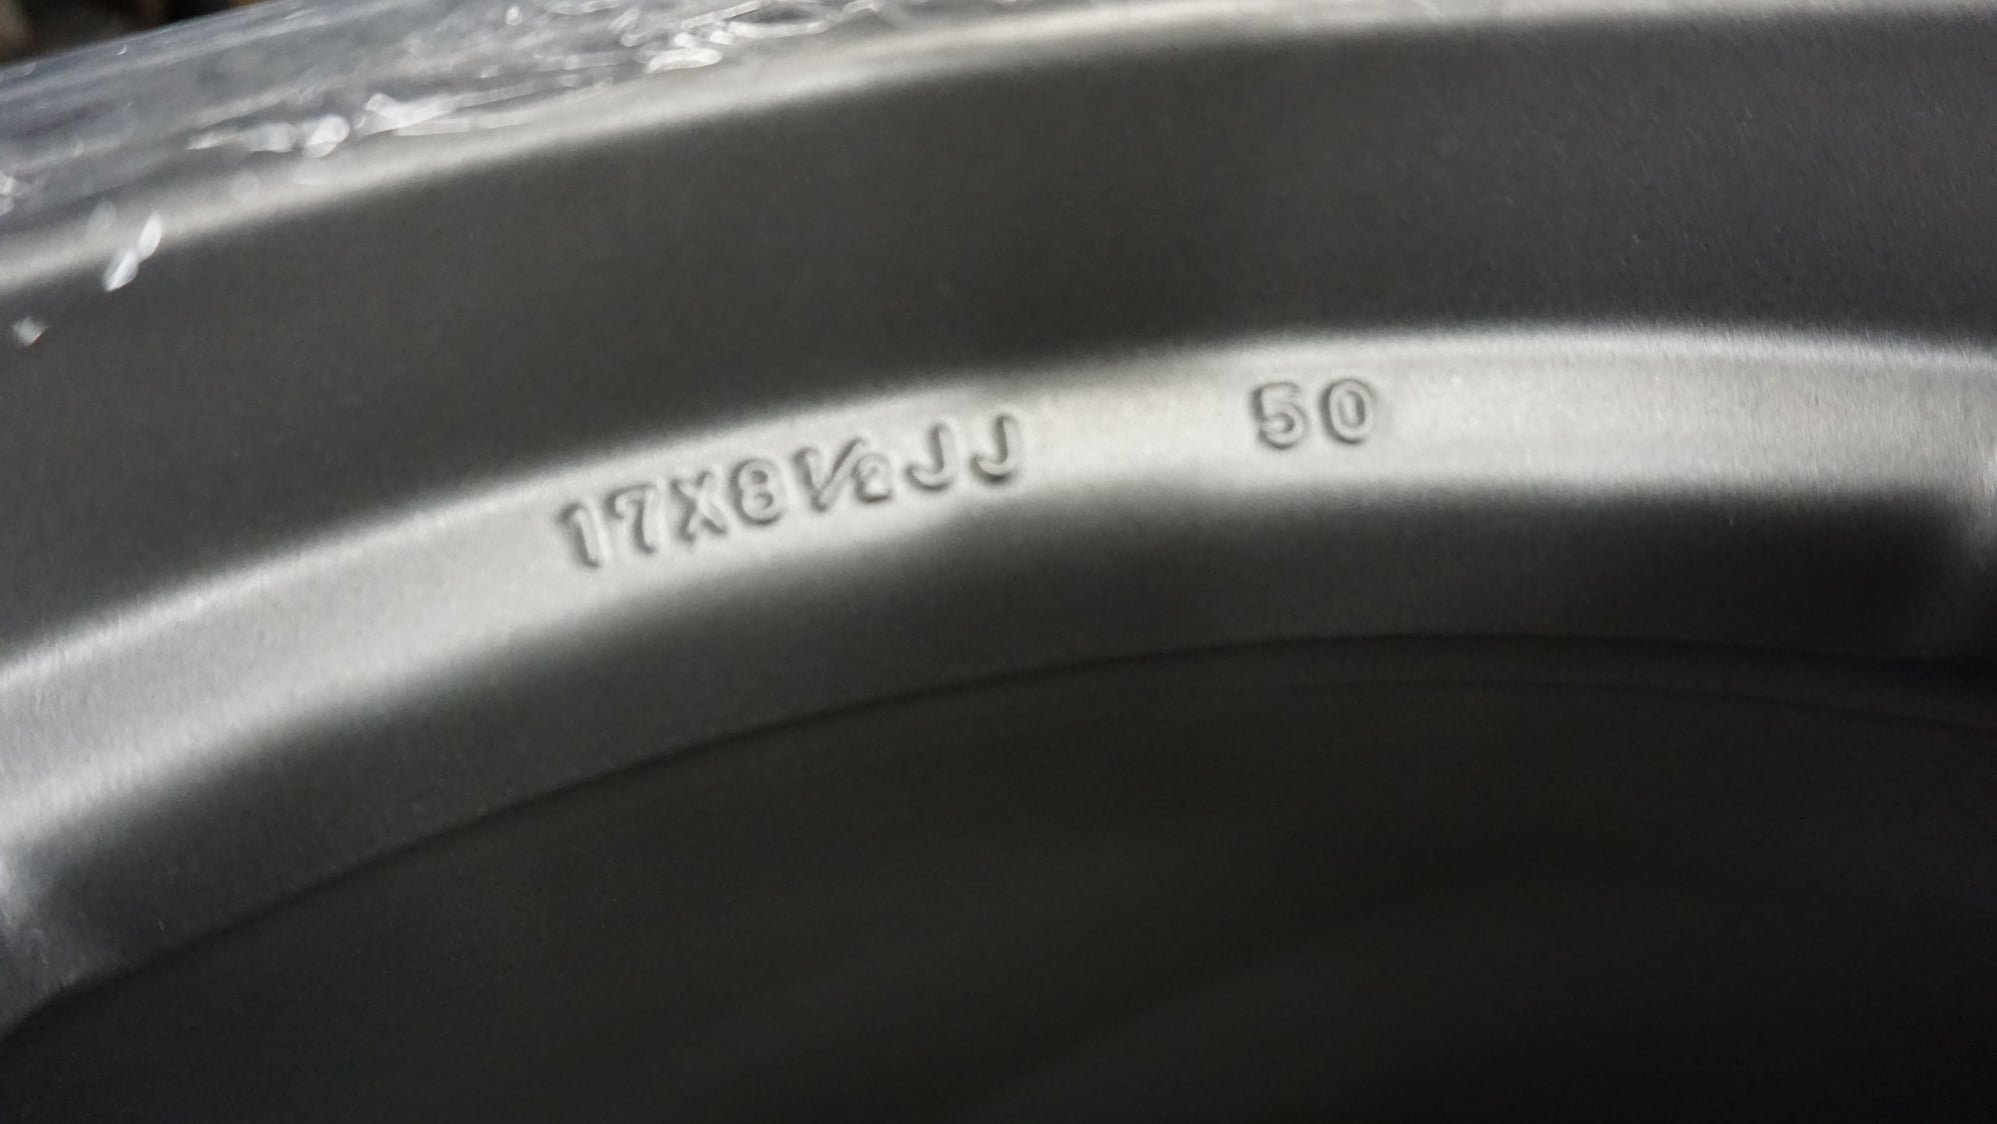 Wheels and Tires/Axles - 17" RS Wheels 10/10 Condition - Used - 1993 to 2002 Mazda RX-7 - Tampa, FL 33634, United States